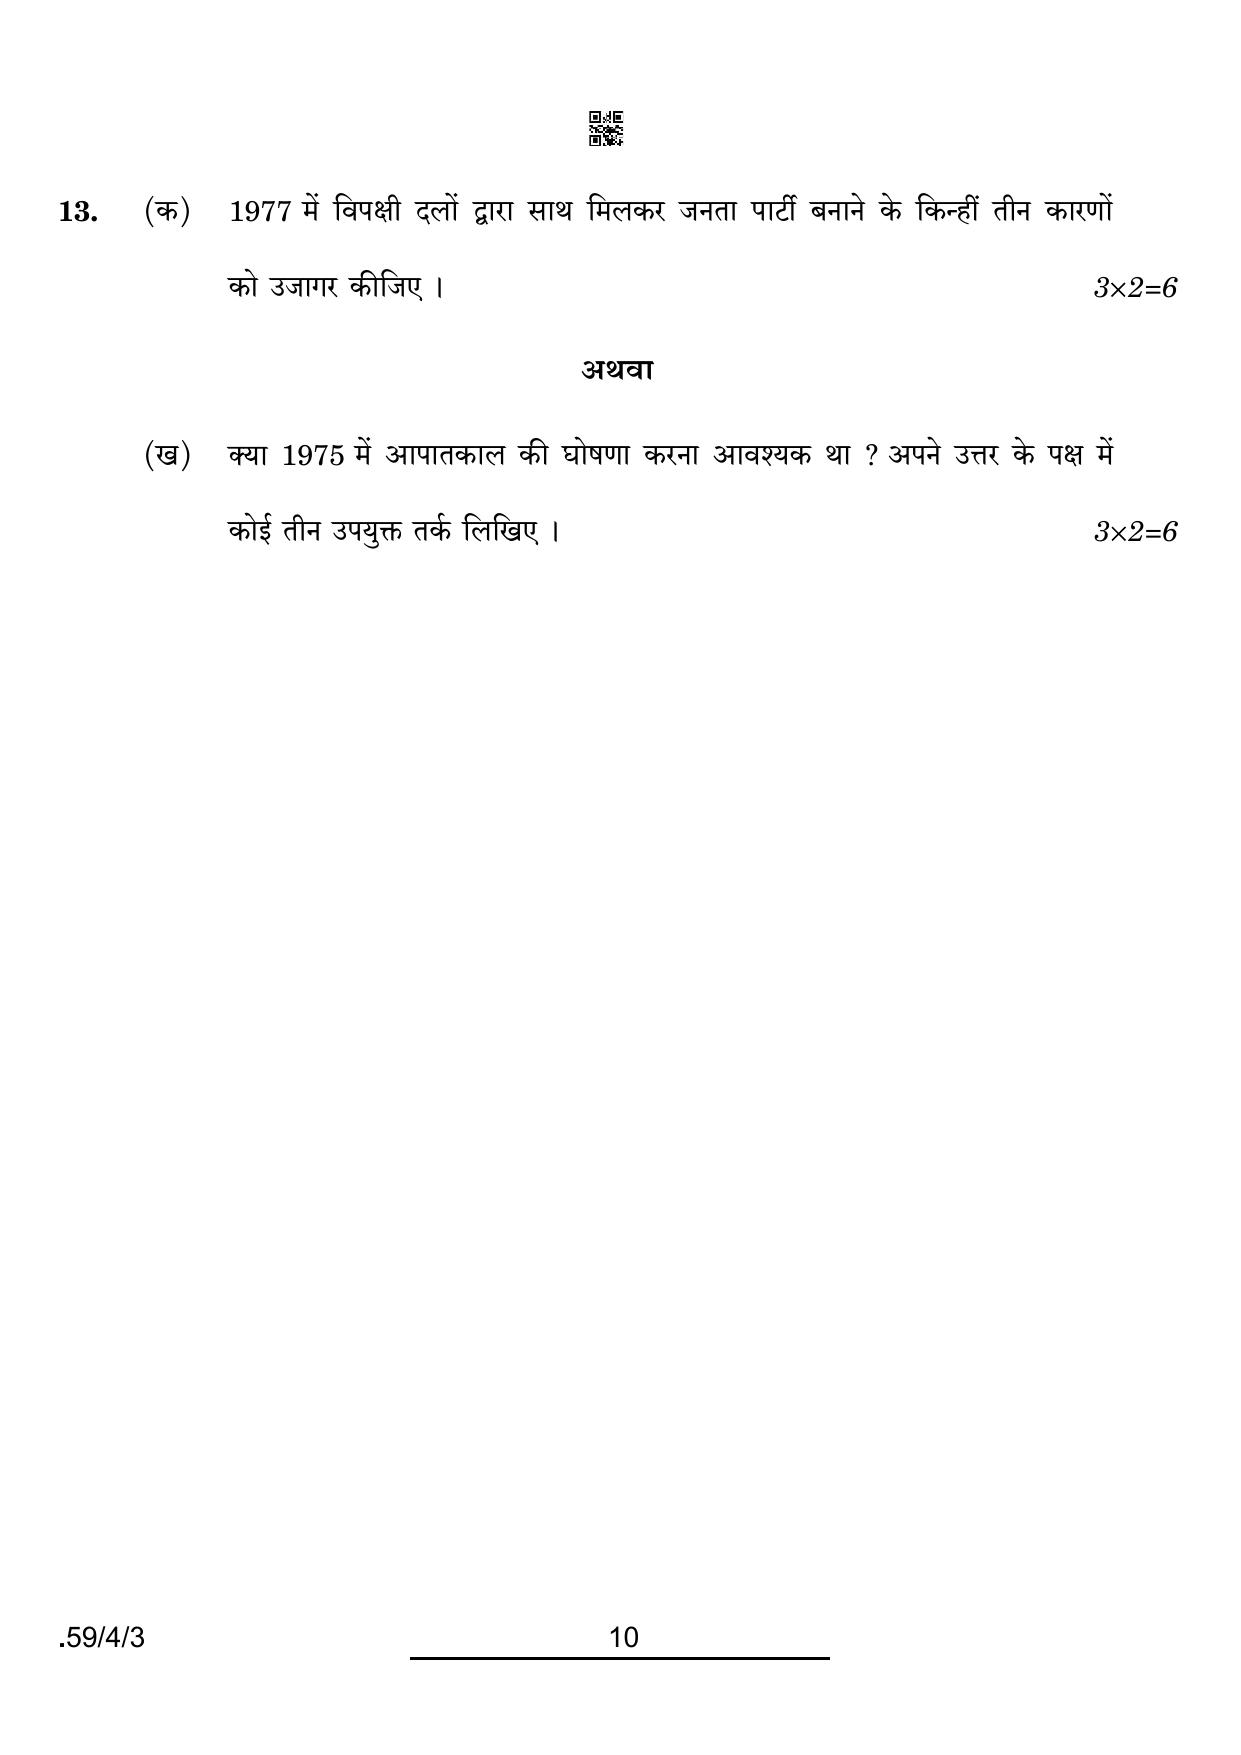 CBSE Class 12 59-4-3 Political Science 2022 Question Paper - Page 10